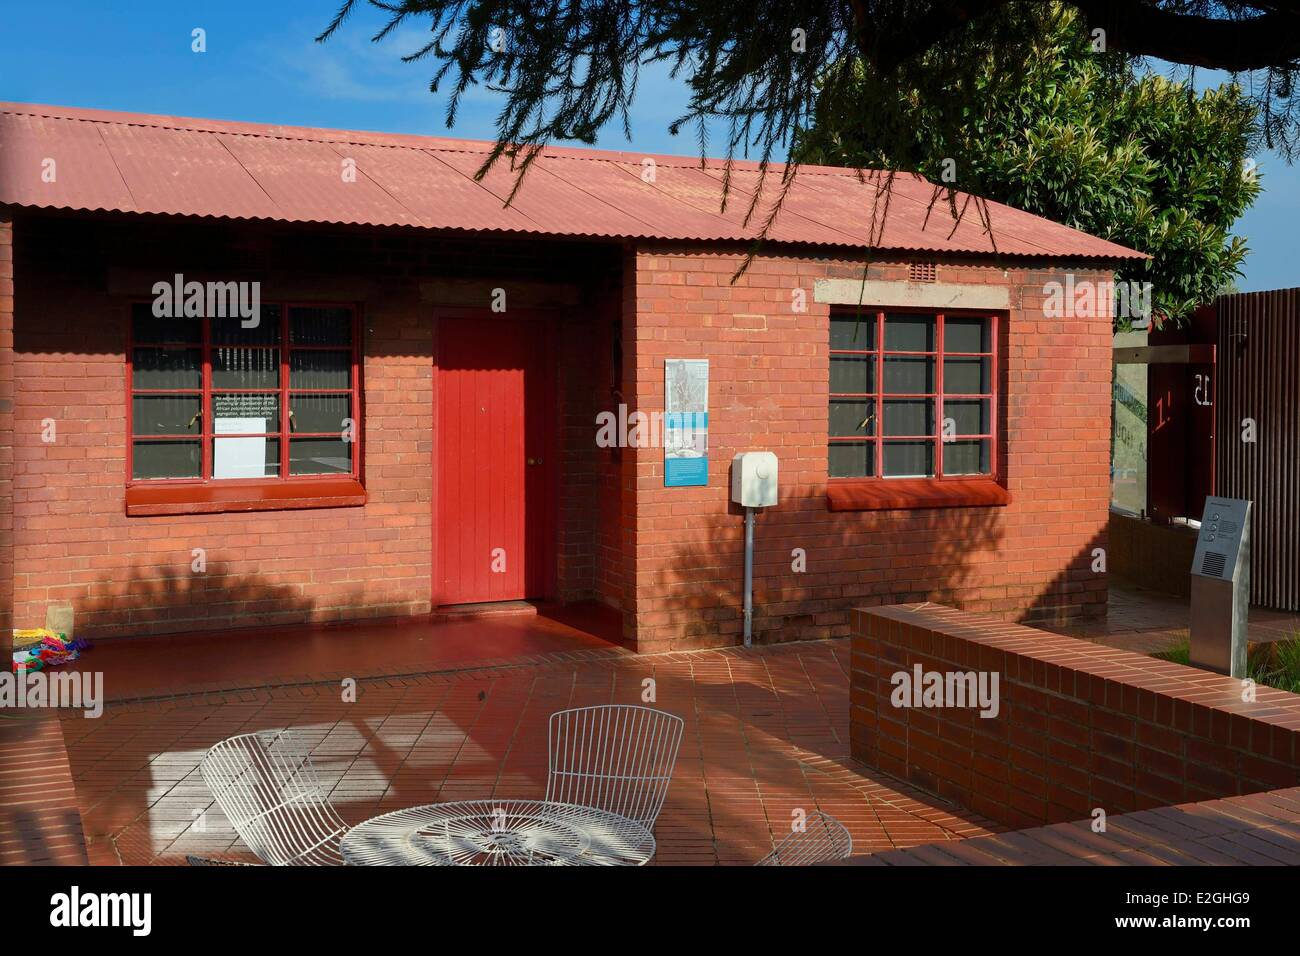 South Africa Gauteng province Johannesburg Soweto Orlando area in township Mandela House is former first historic family home of Nelson Mandela where he lived between 1946 and 1962 Stock Photo